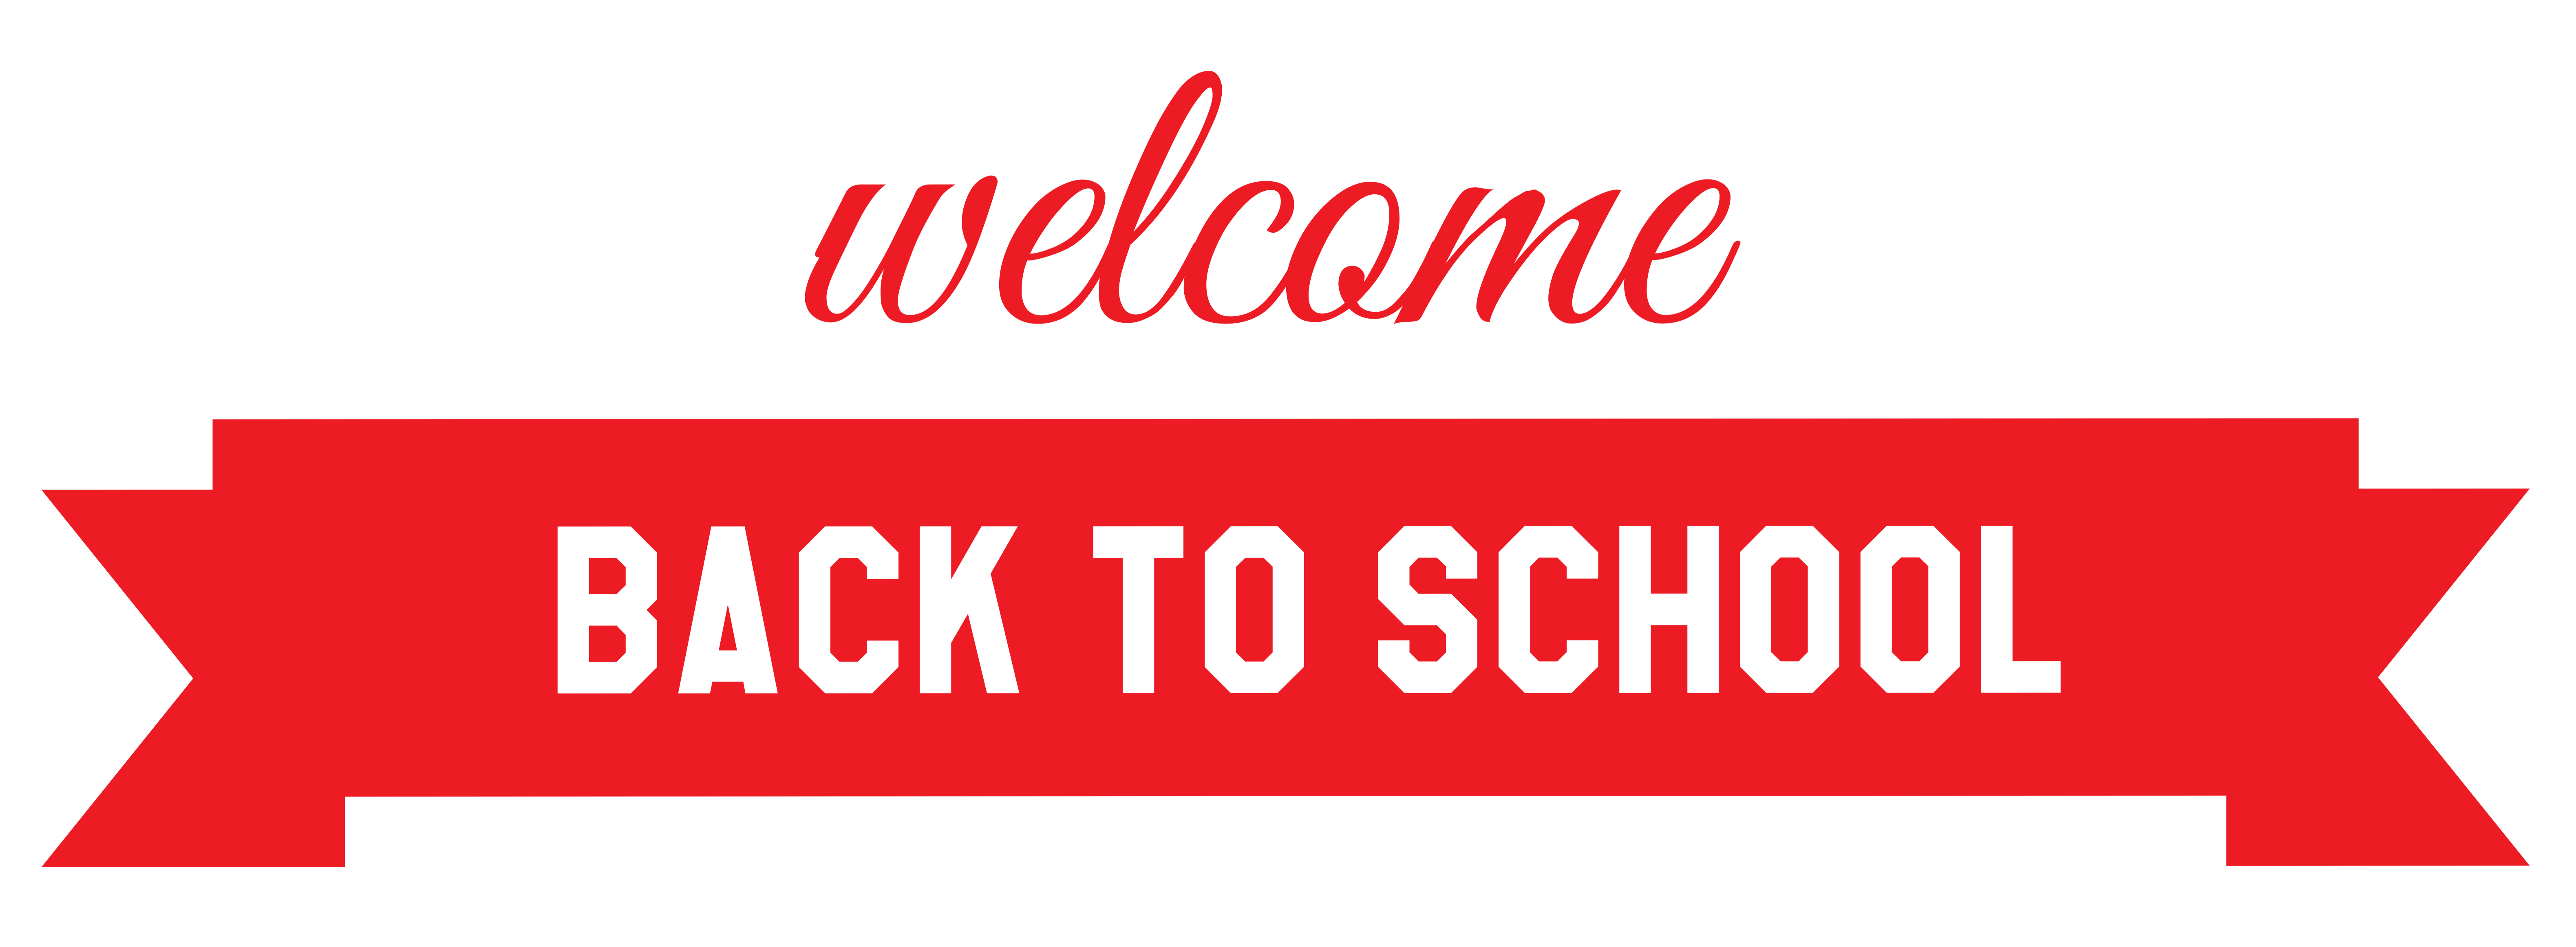 free back to school banner clip art - photo #10